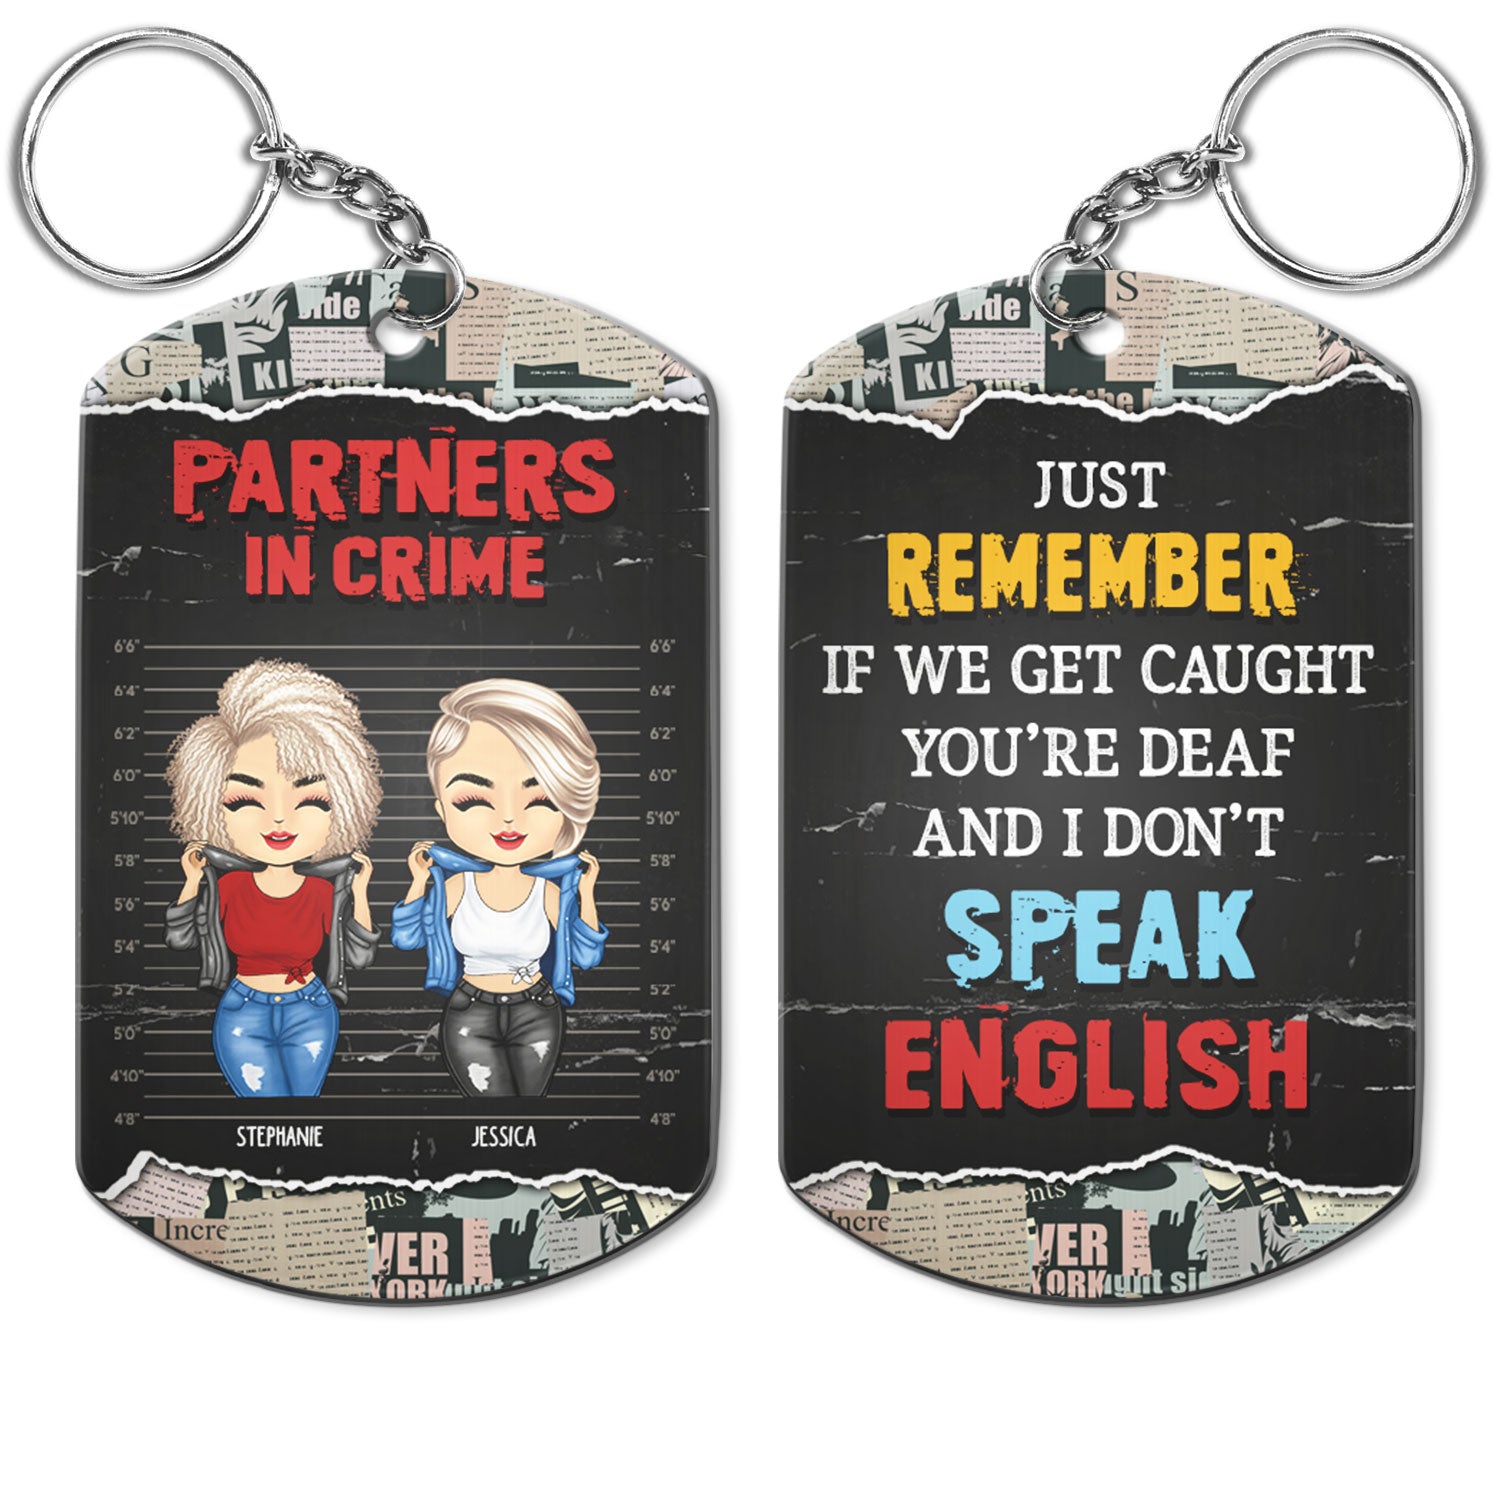 I Don't Speak English - Gift For Besties, Sisters - Personalized Aluminum Keychain